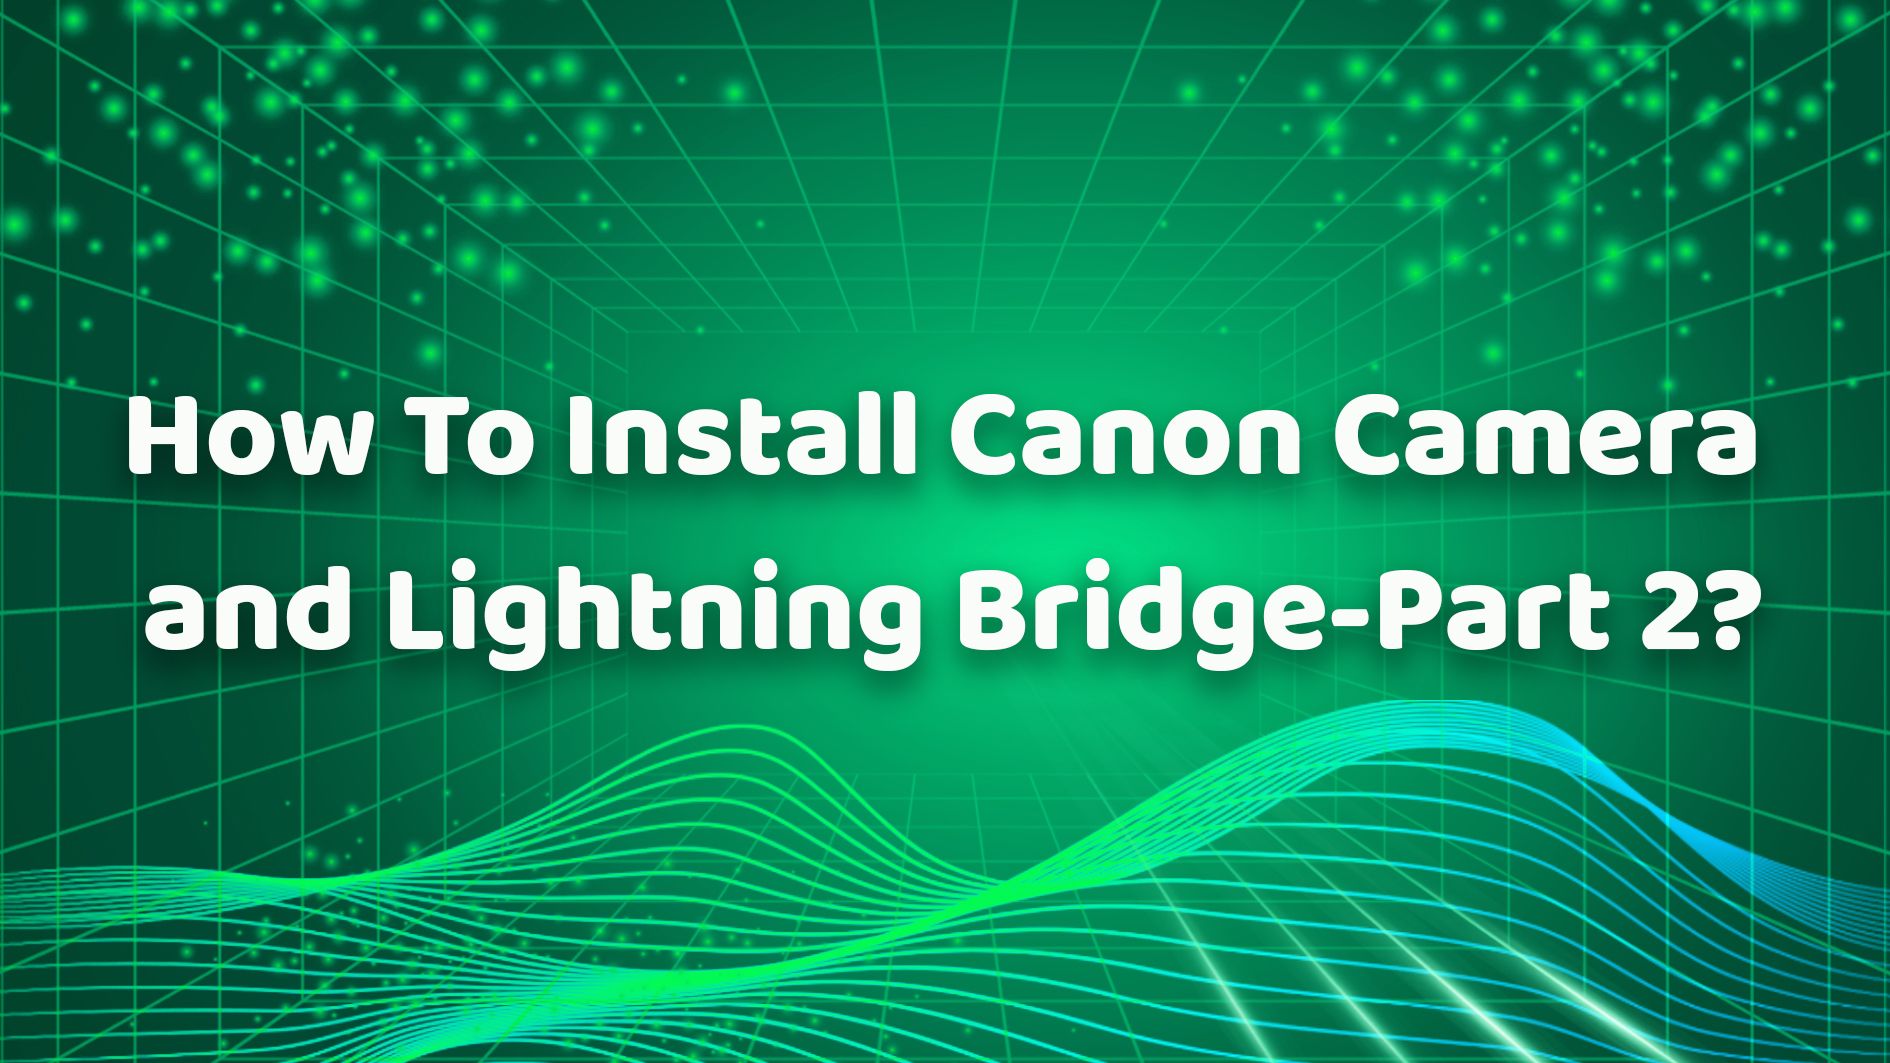 How To Install Canon Camera and Lightning Bridge-Part 2？